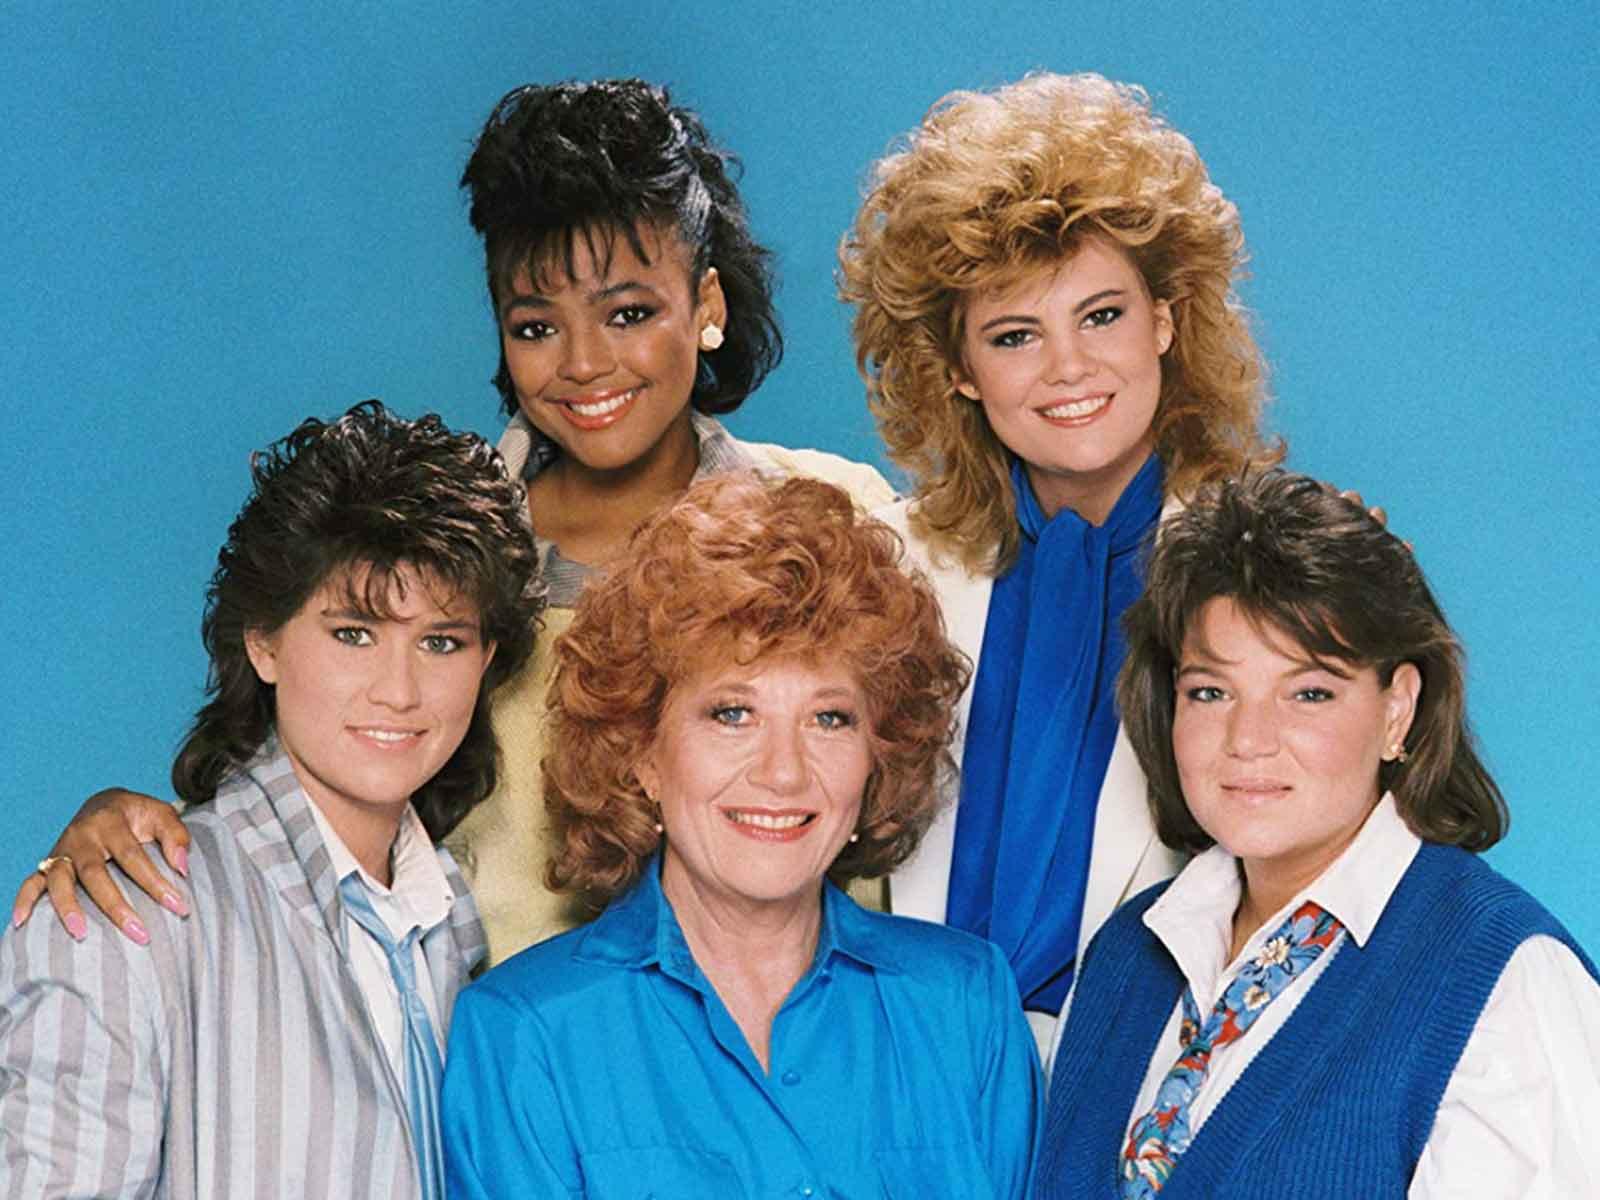 ‘The Facts of Life’ Reboot In the Works With Leo DiCaprio & Jessica Biel’s Names Attached